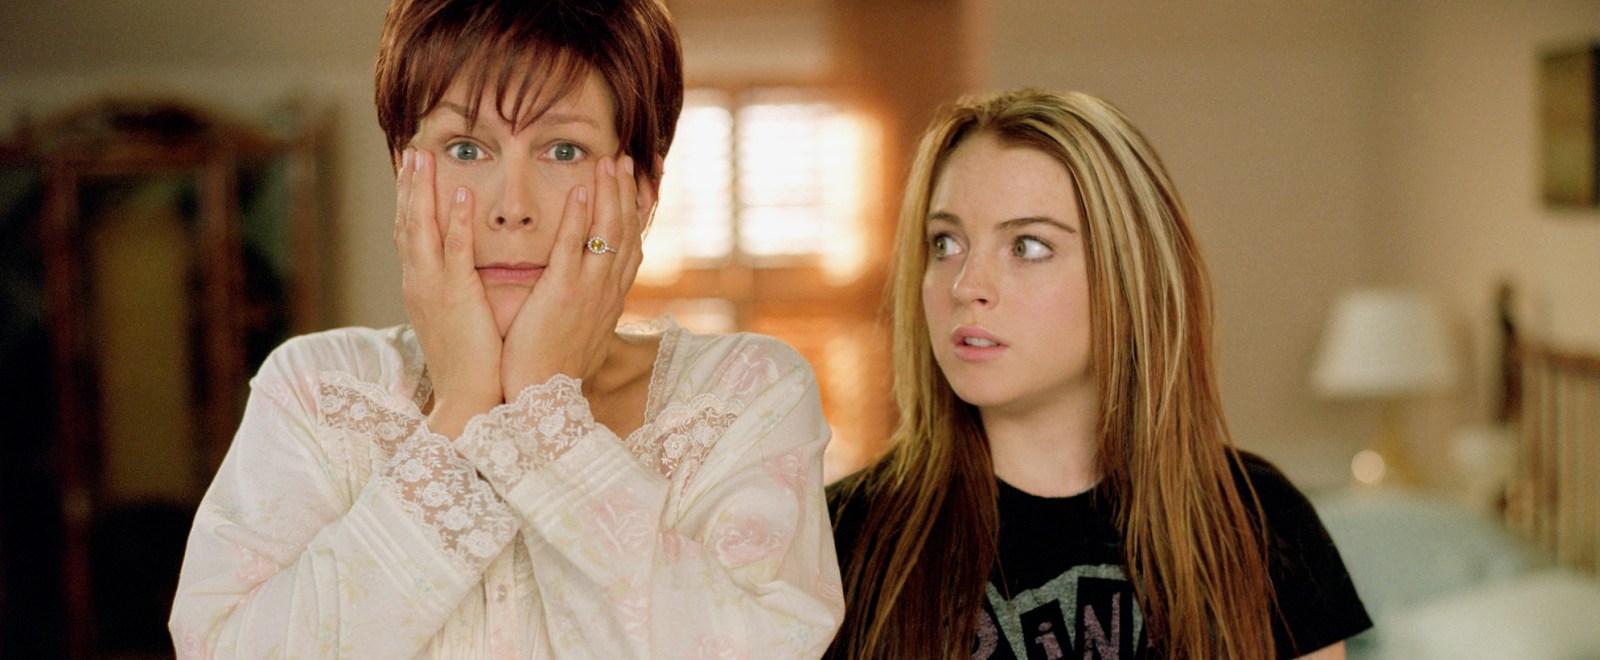 The ‘Freaky Friday’ Sequel Will Have Even More Body Swapping Than The Original, According To Newly Revealed Plot Details